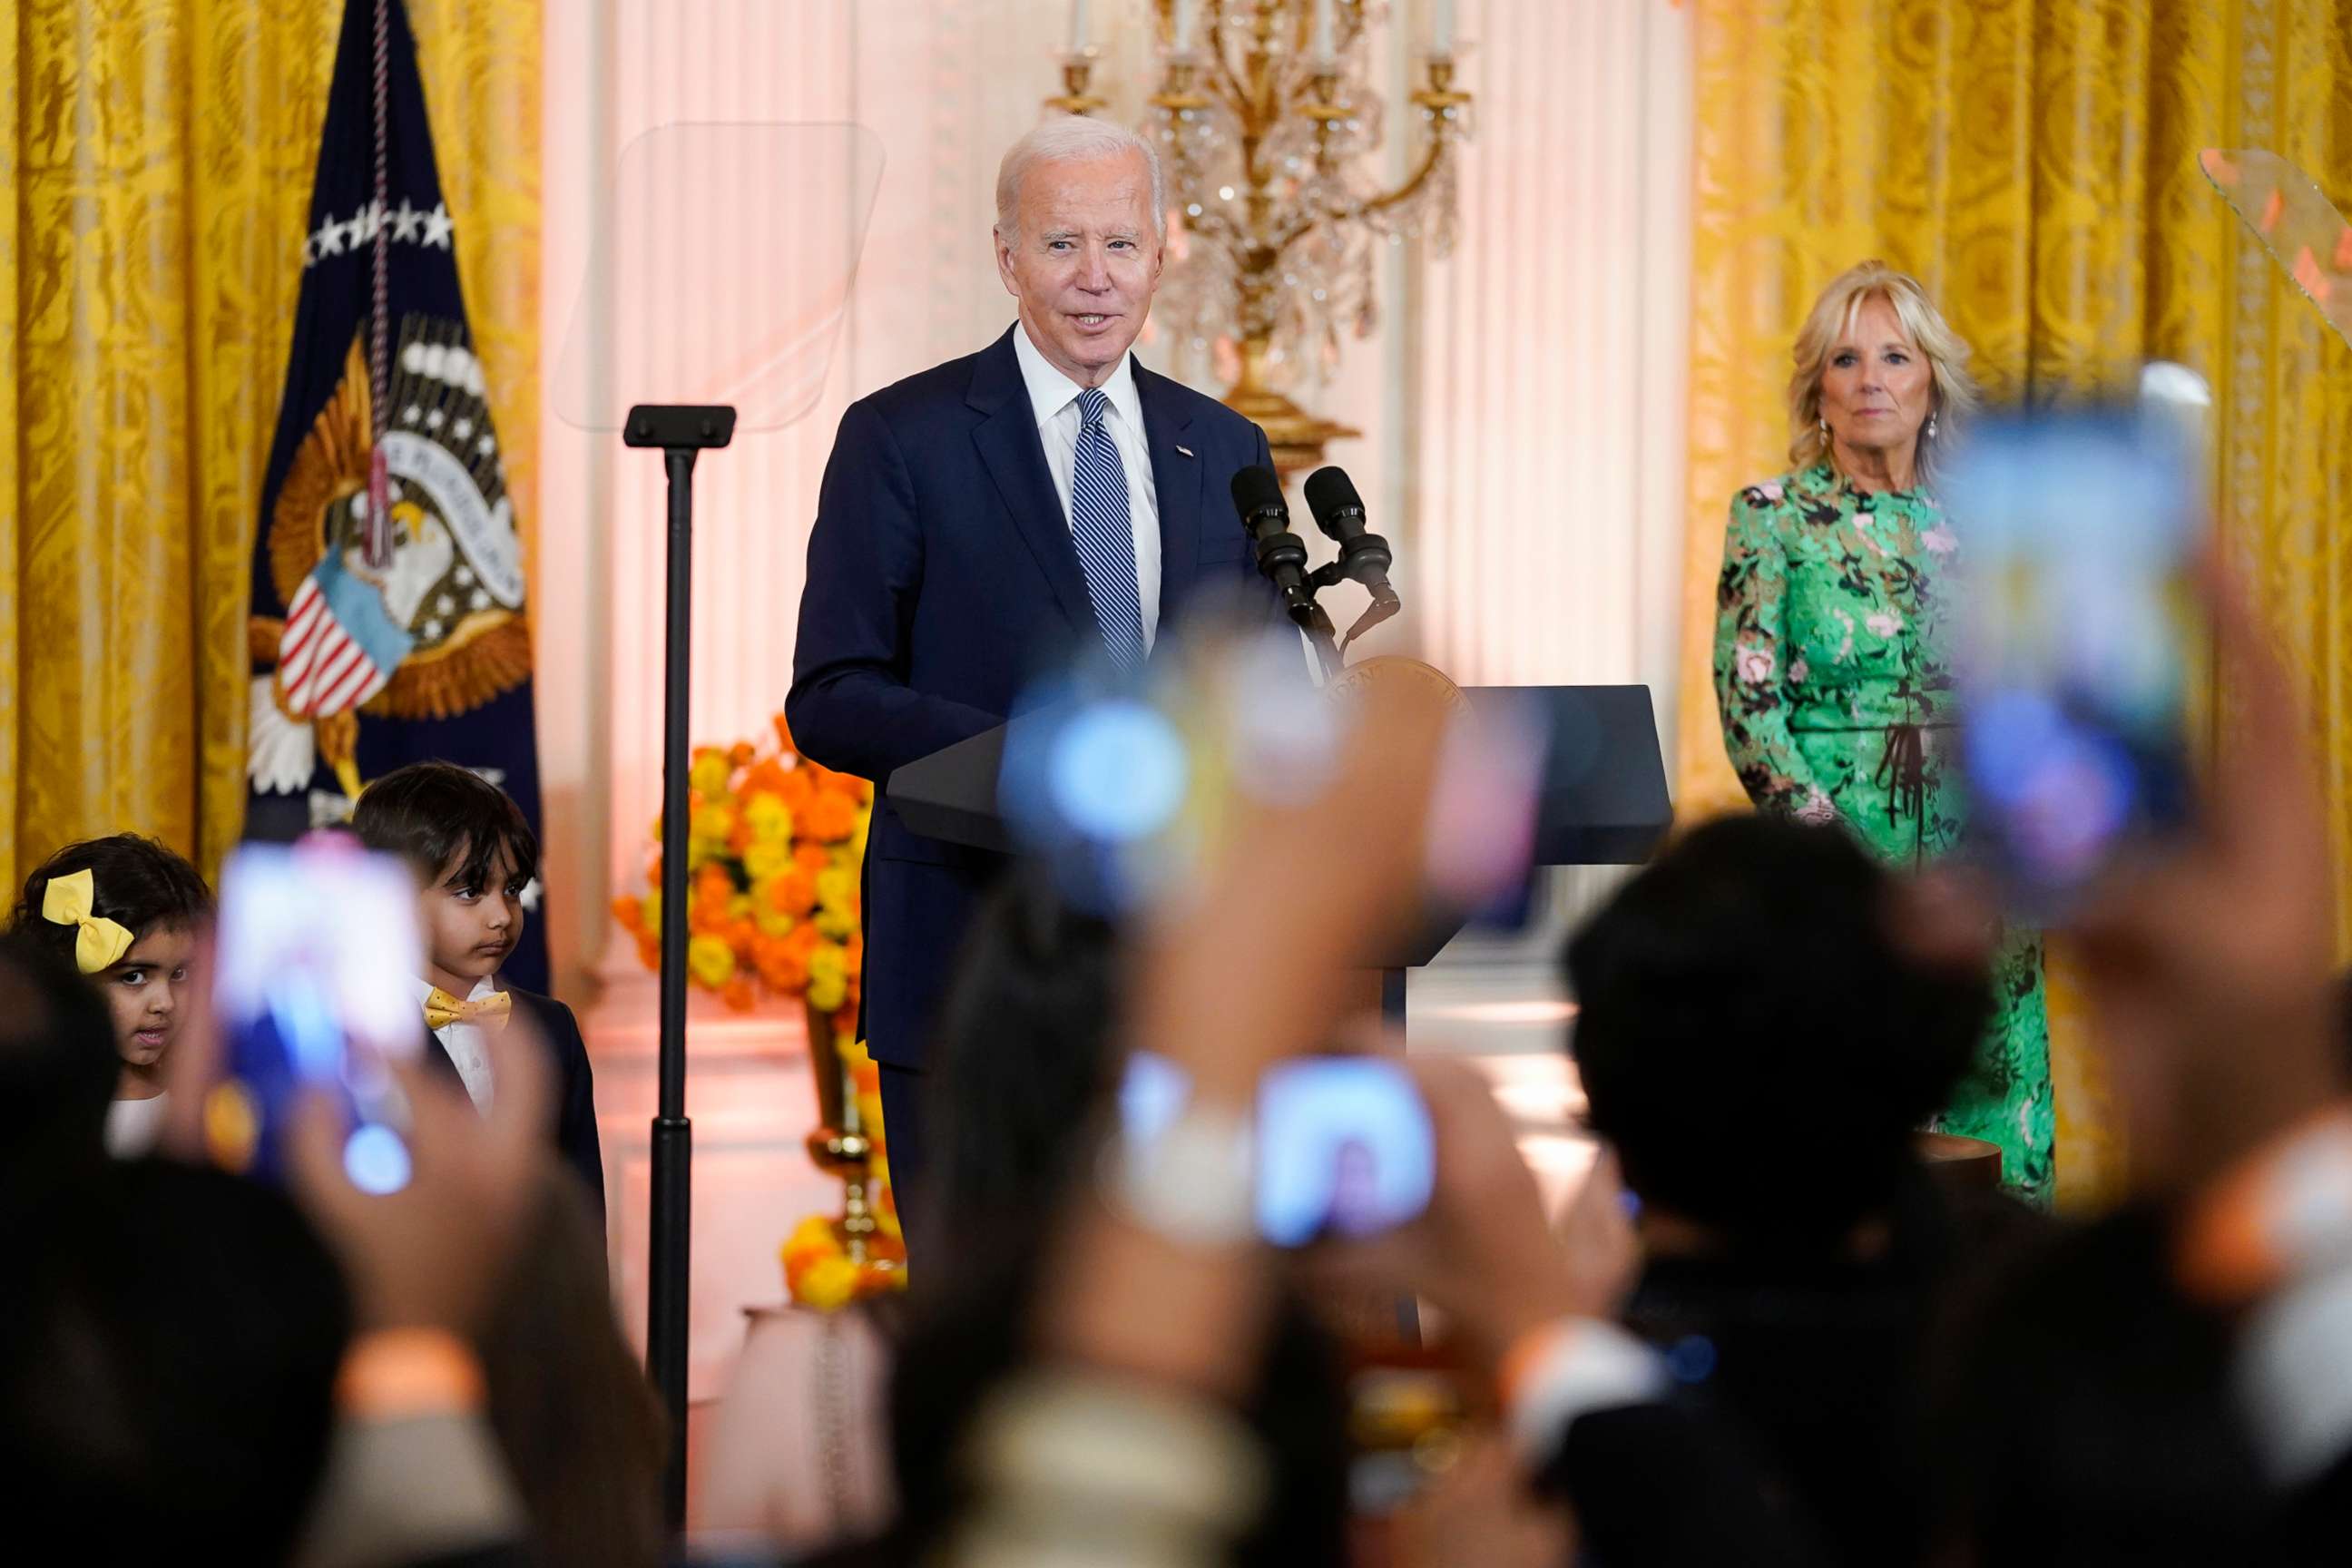 PHOTO: President Joe Biden speaks after inviting two children on stage during an event to celebrate Diwali, in the East Room of the White House, Oct. 24, 2022.